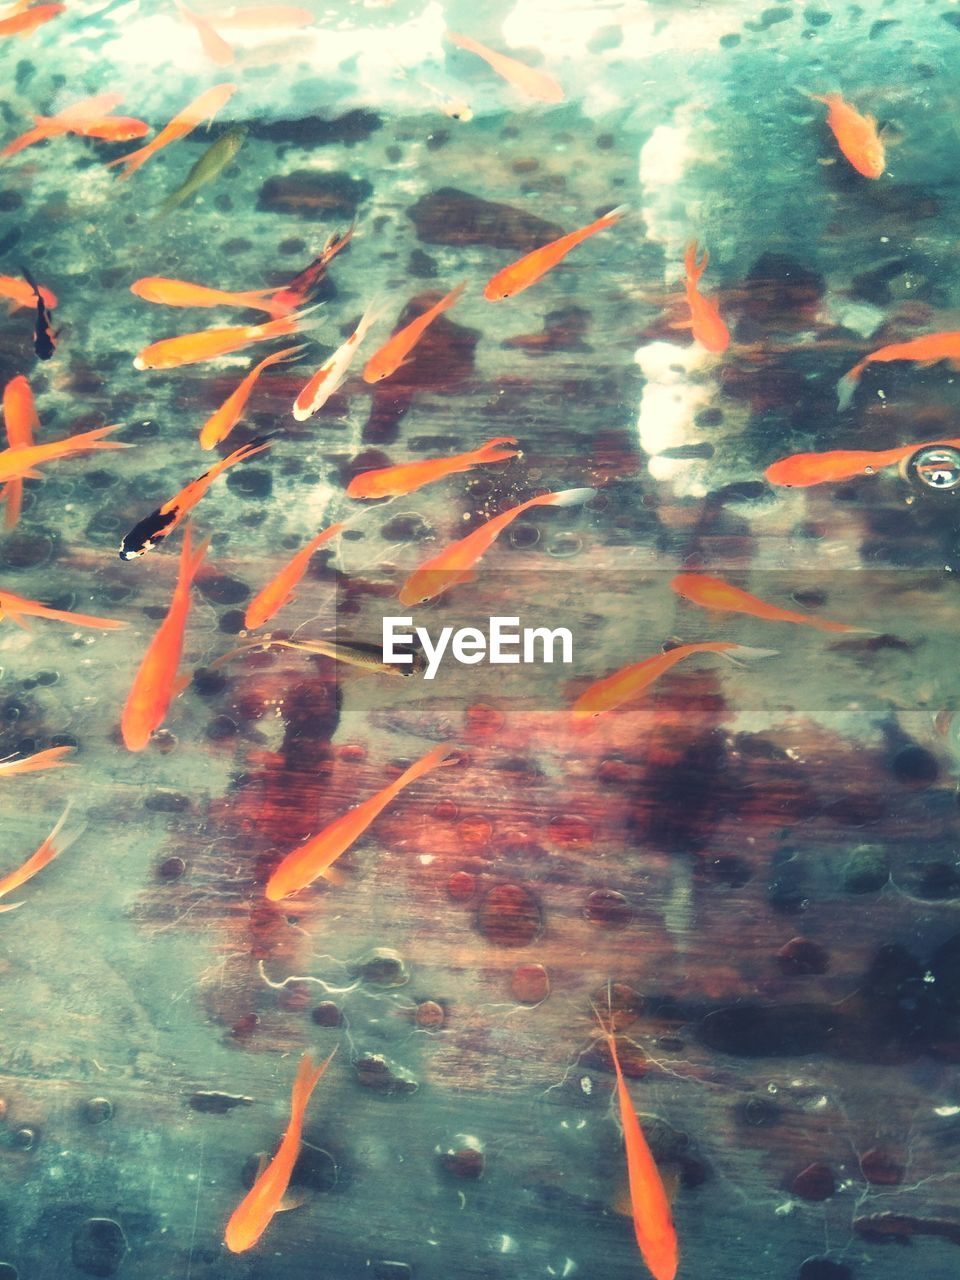 CLOSE-UP OF KOI CARPS IN WATER